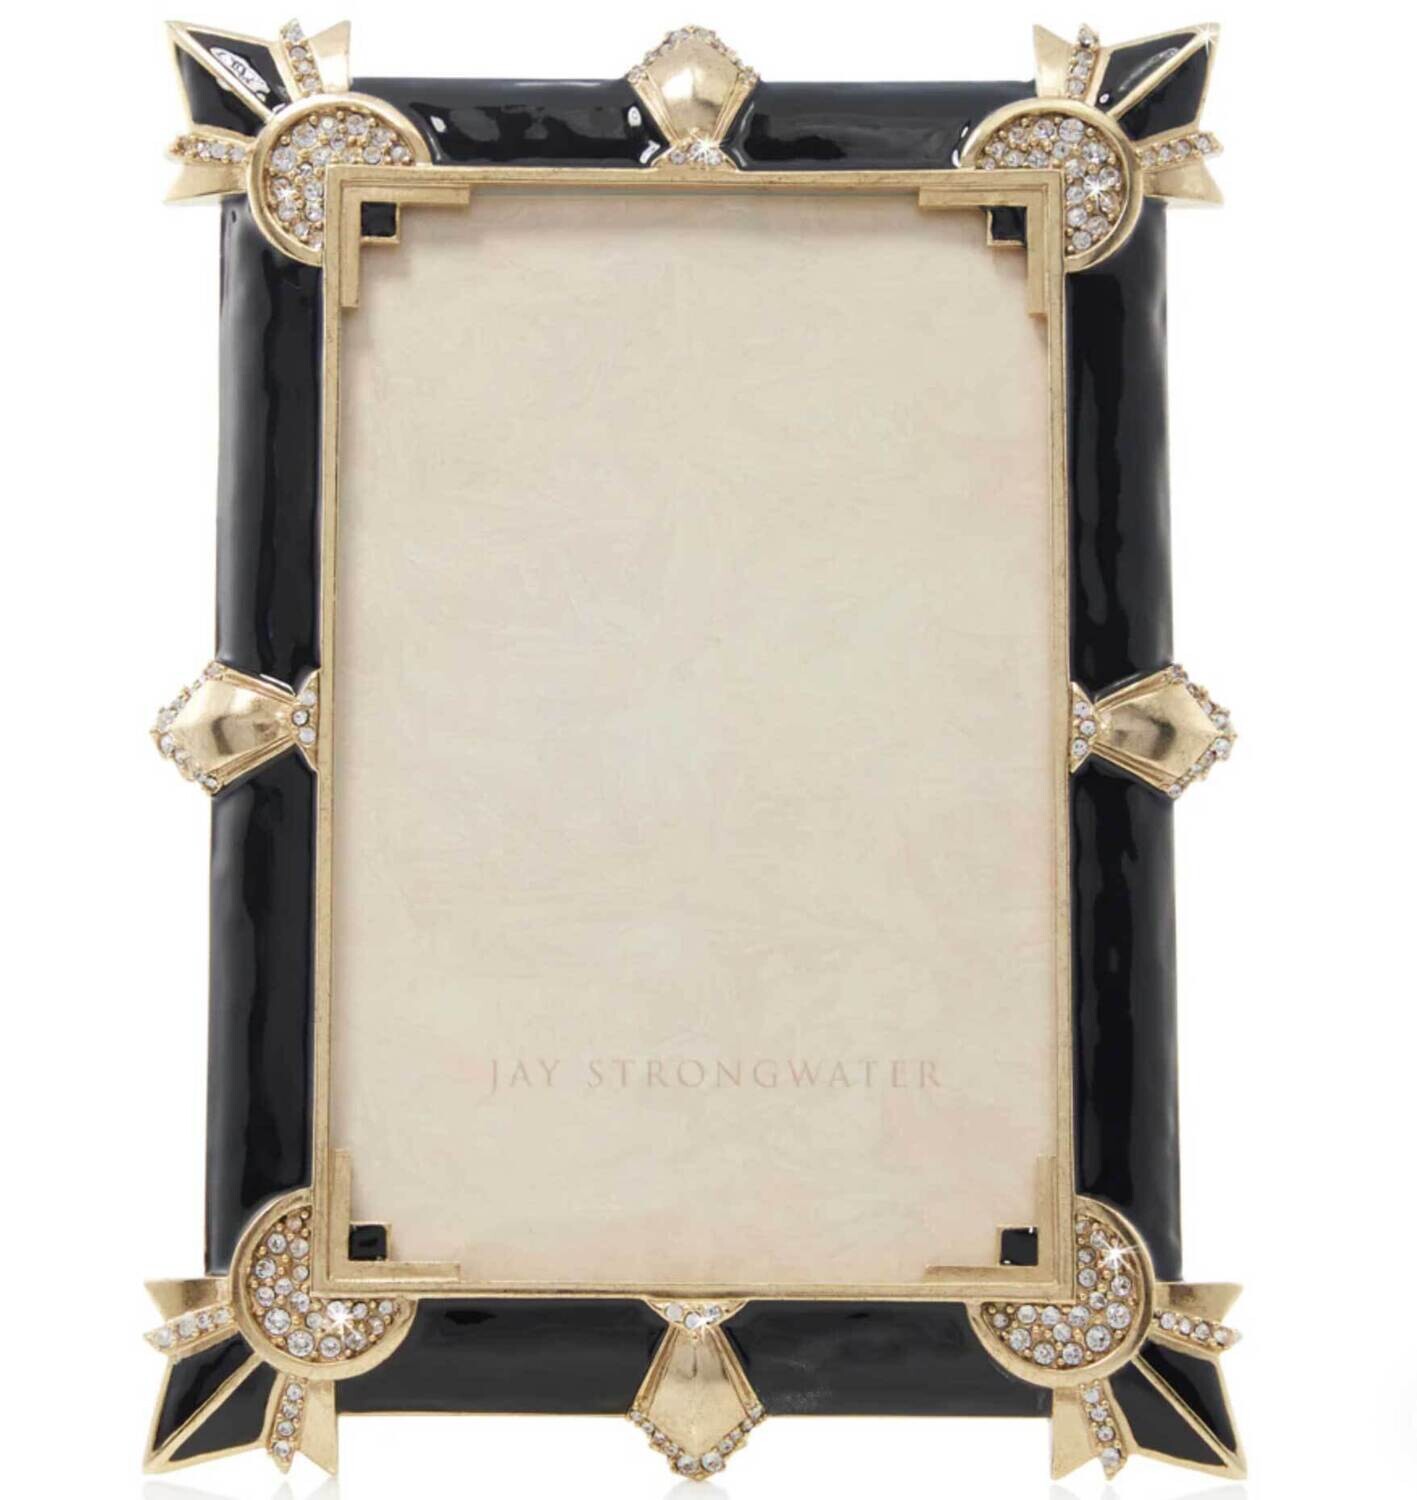 Jay Strongwater Ruth 4 x 6 Inch Art Deco Picture Frame SPF5900-220